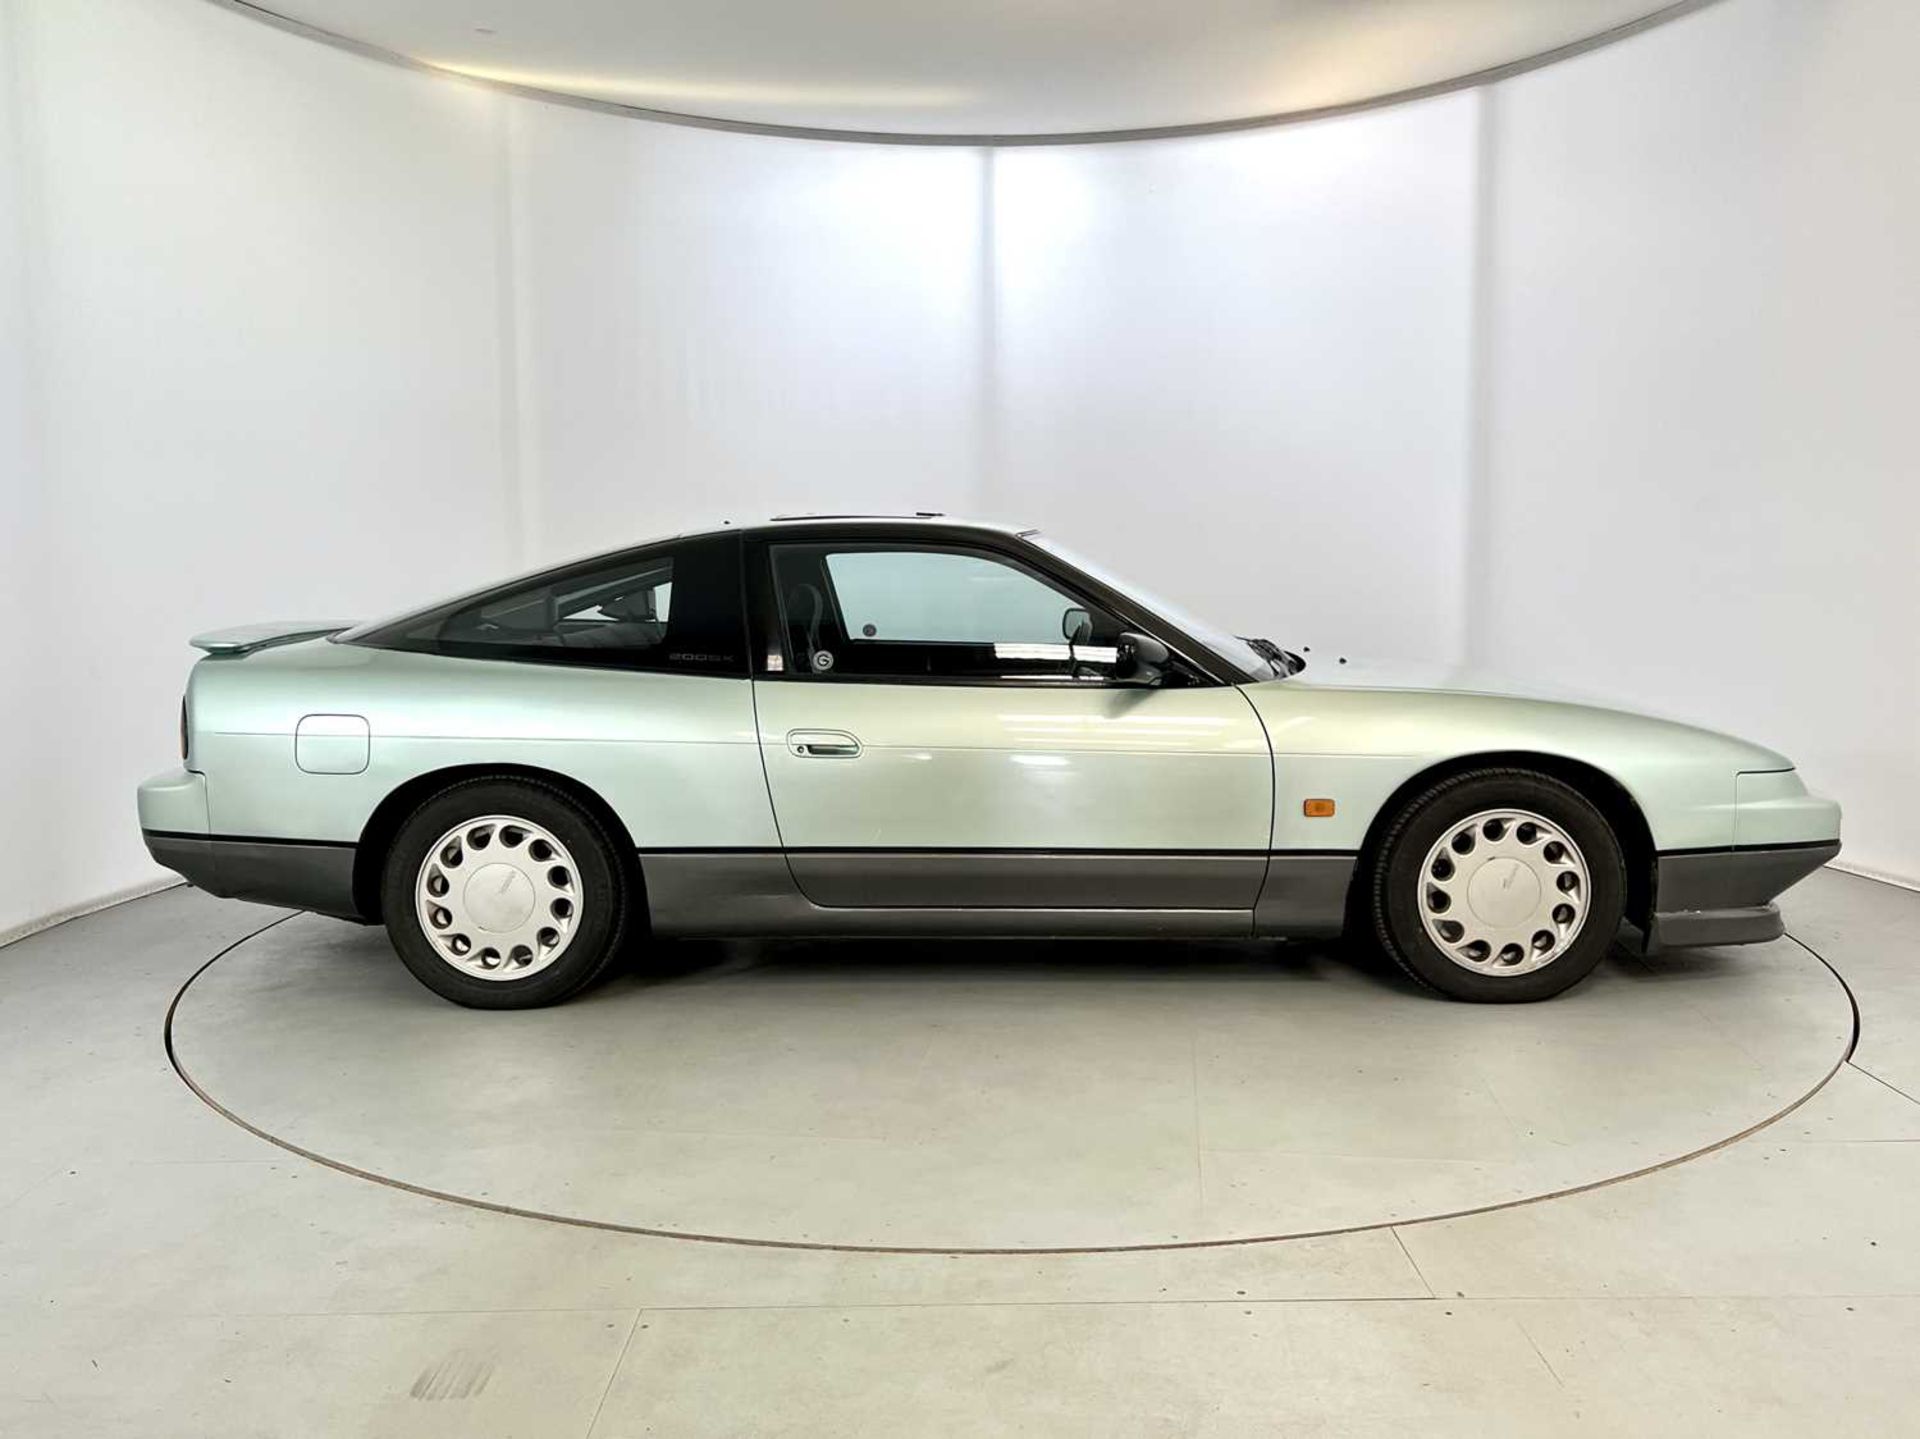 1990 Nissan 200SX - Image 11 of 30